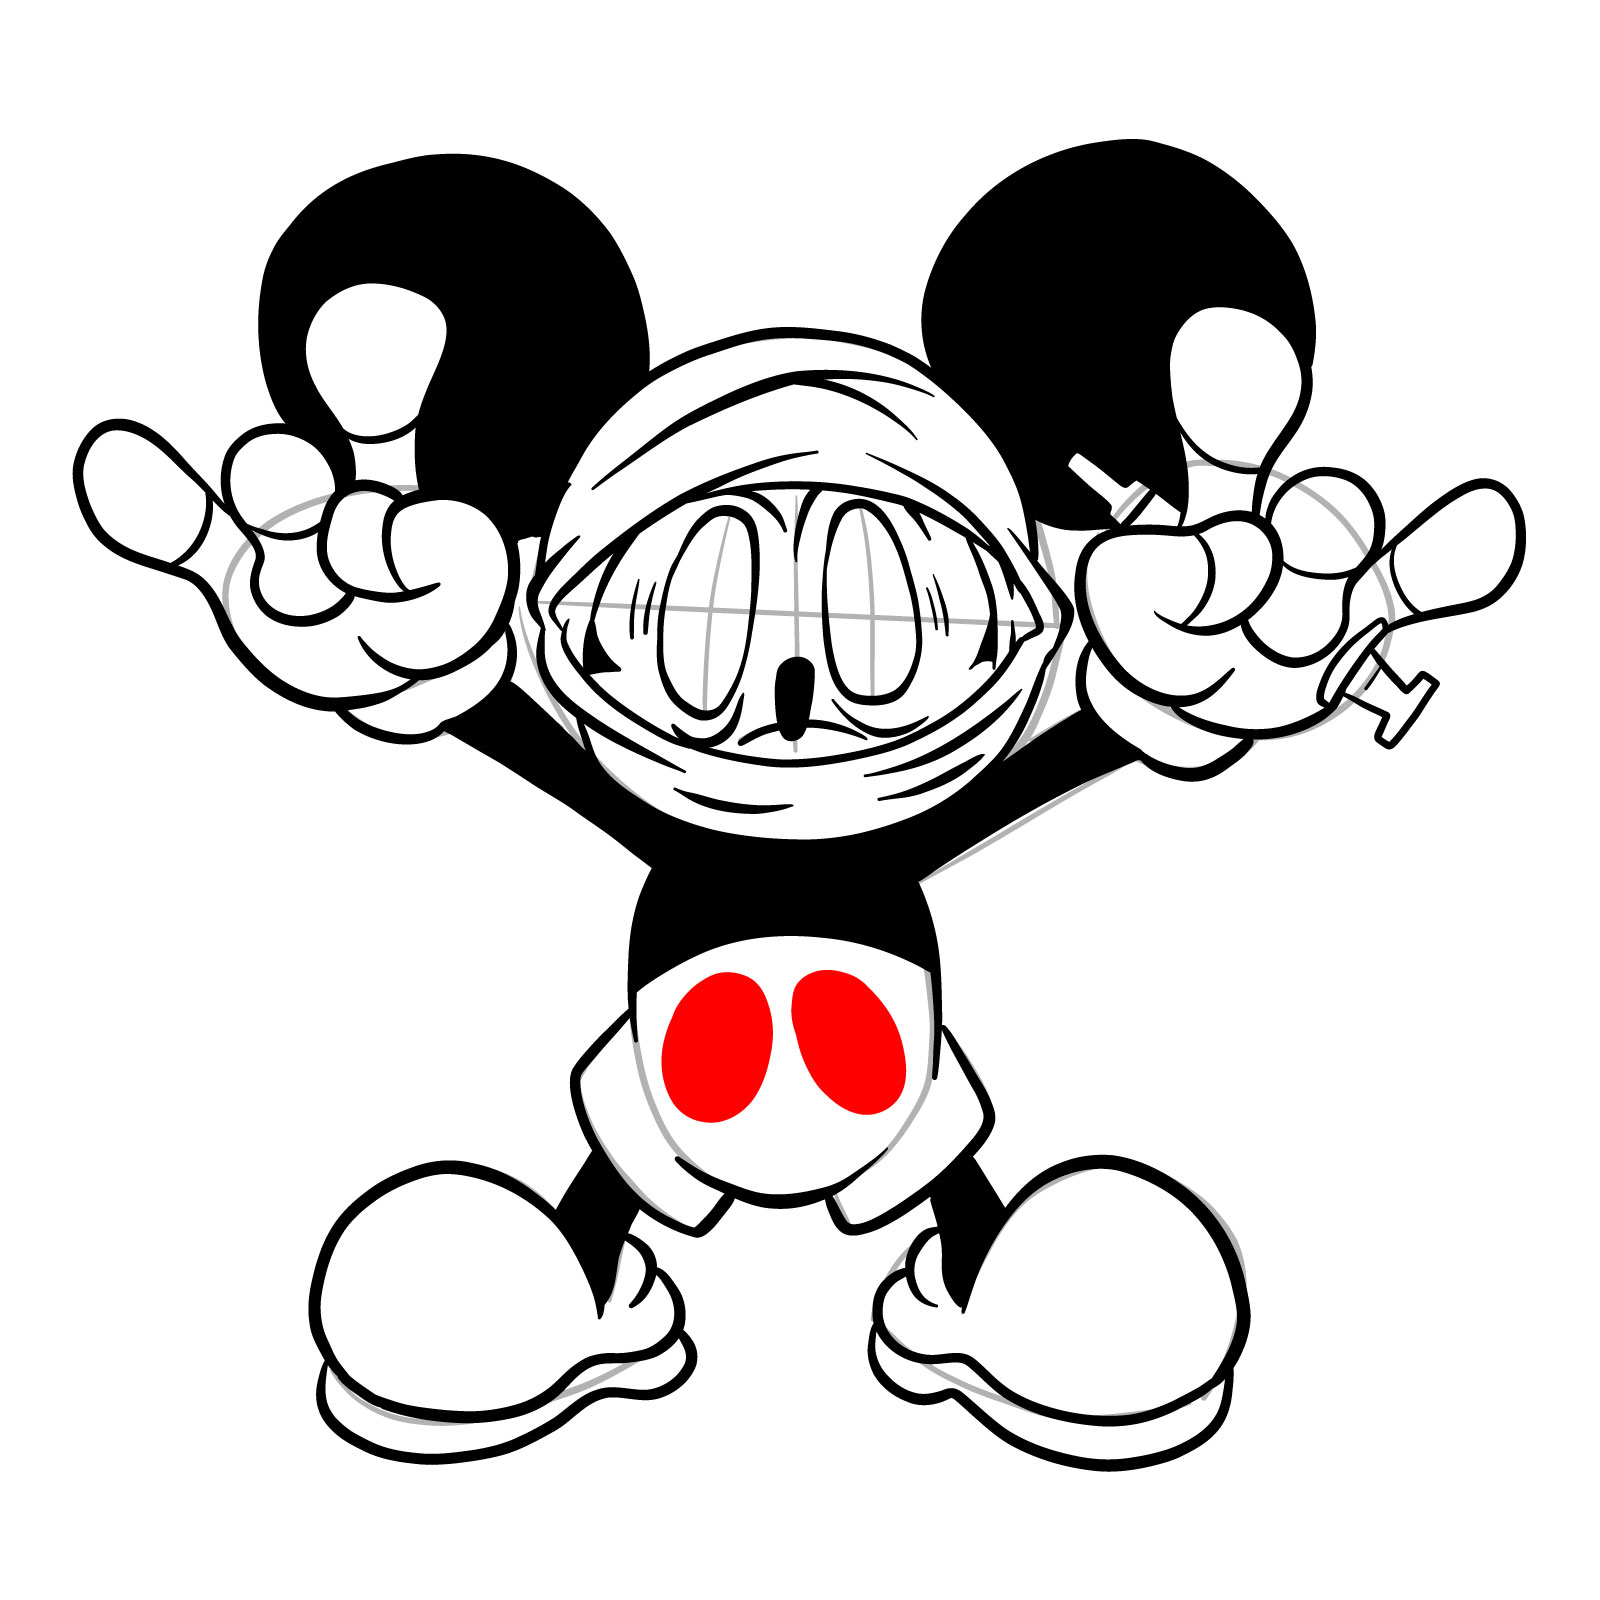 How to draw battered Mickey taunting - step 25